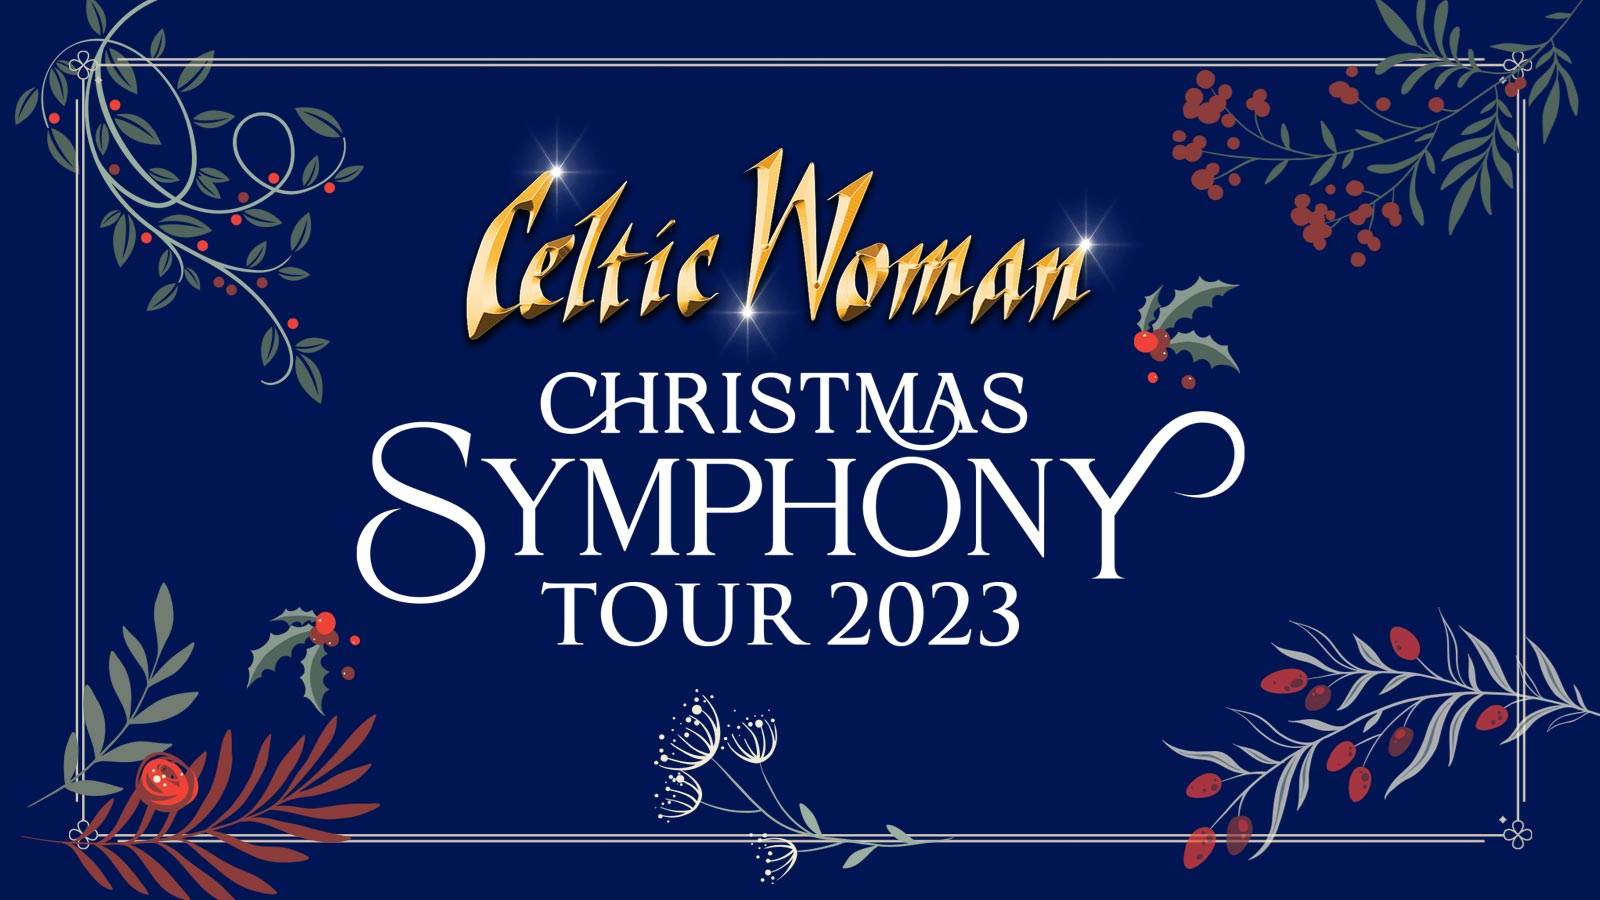 Celtic Woman Symphony logo on navy background with holly frame detailing